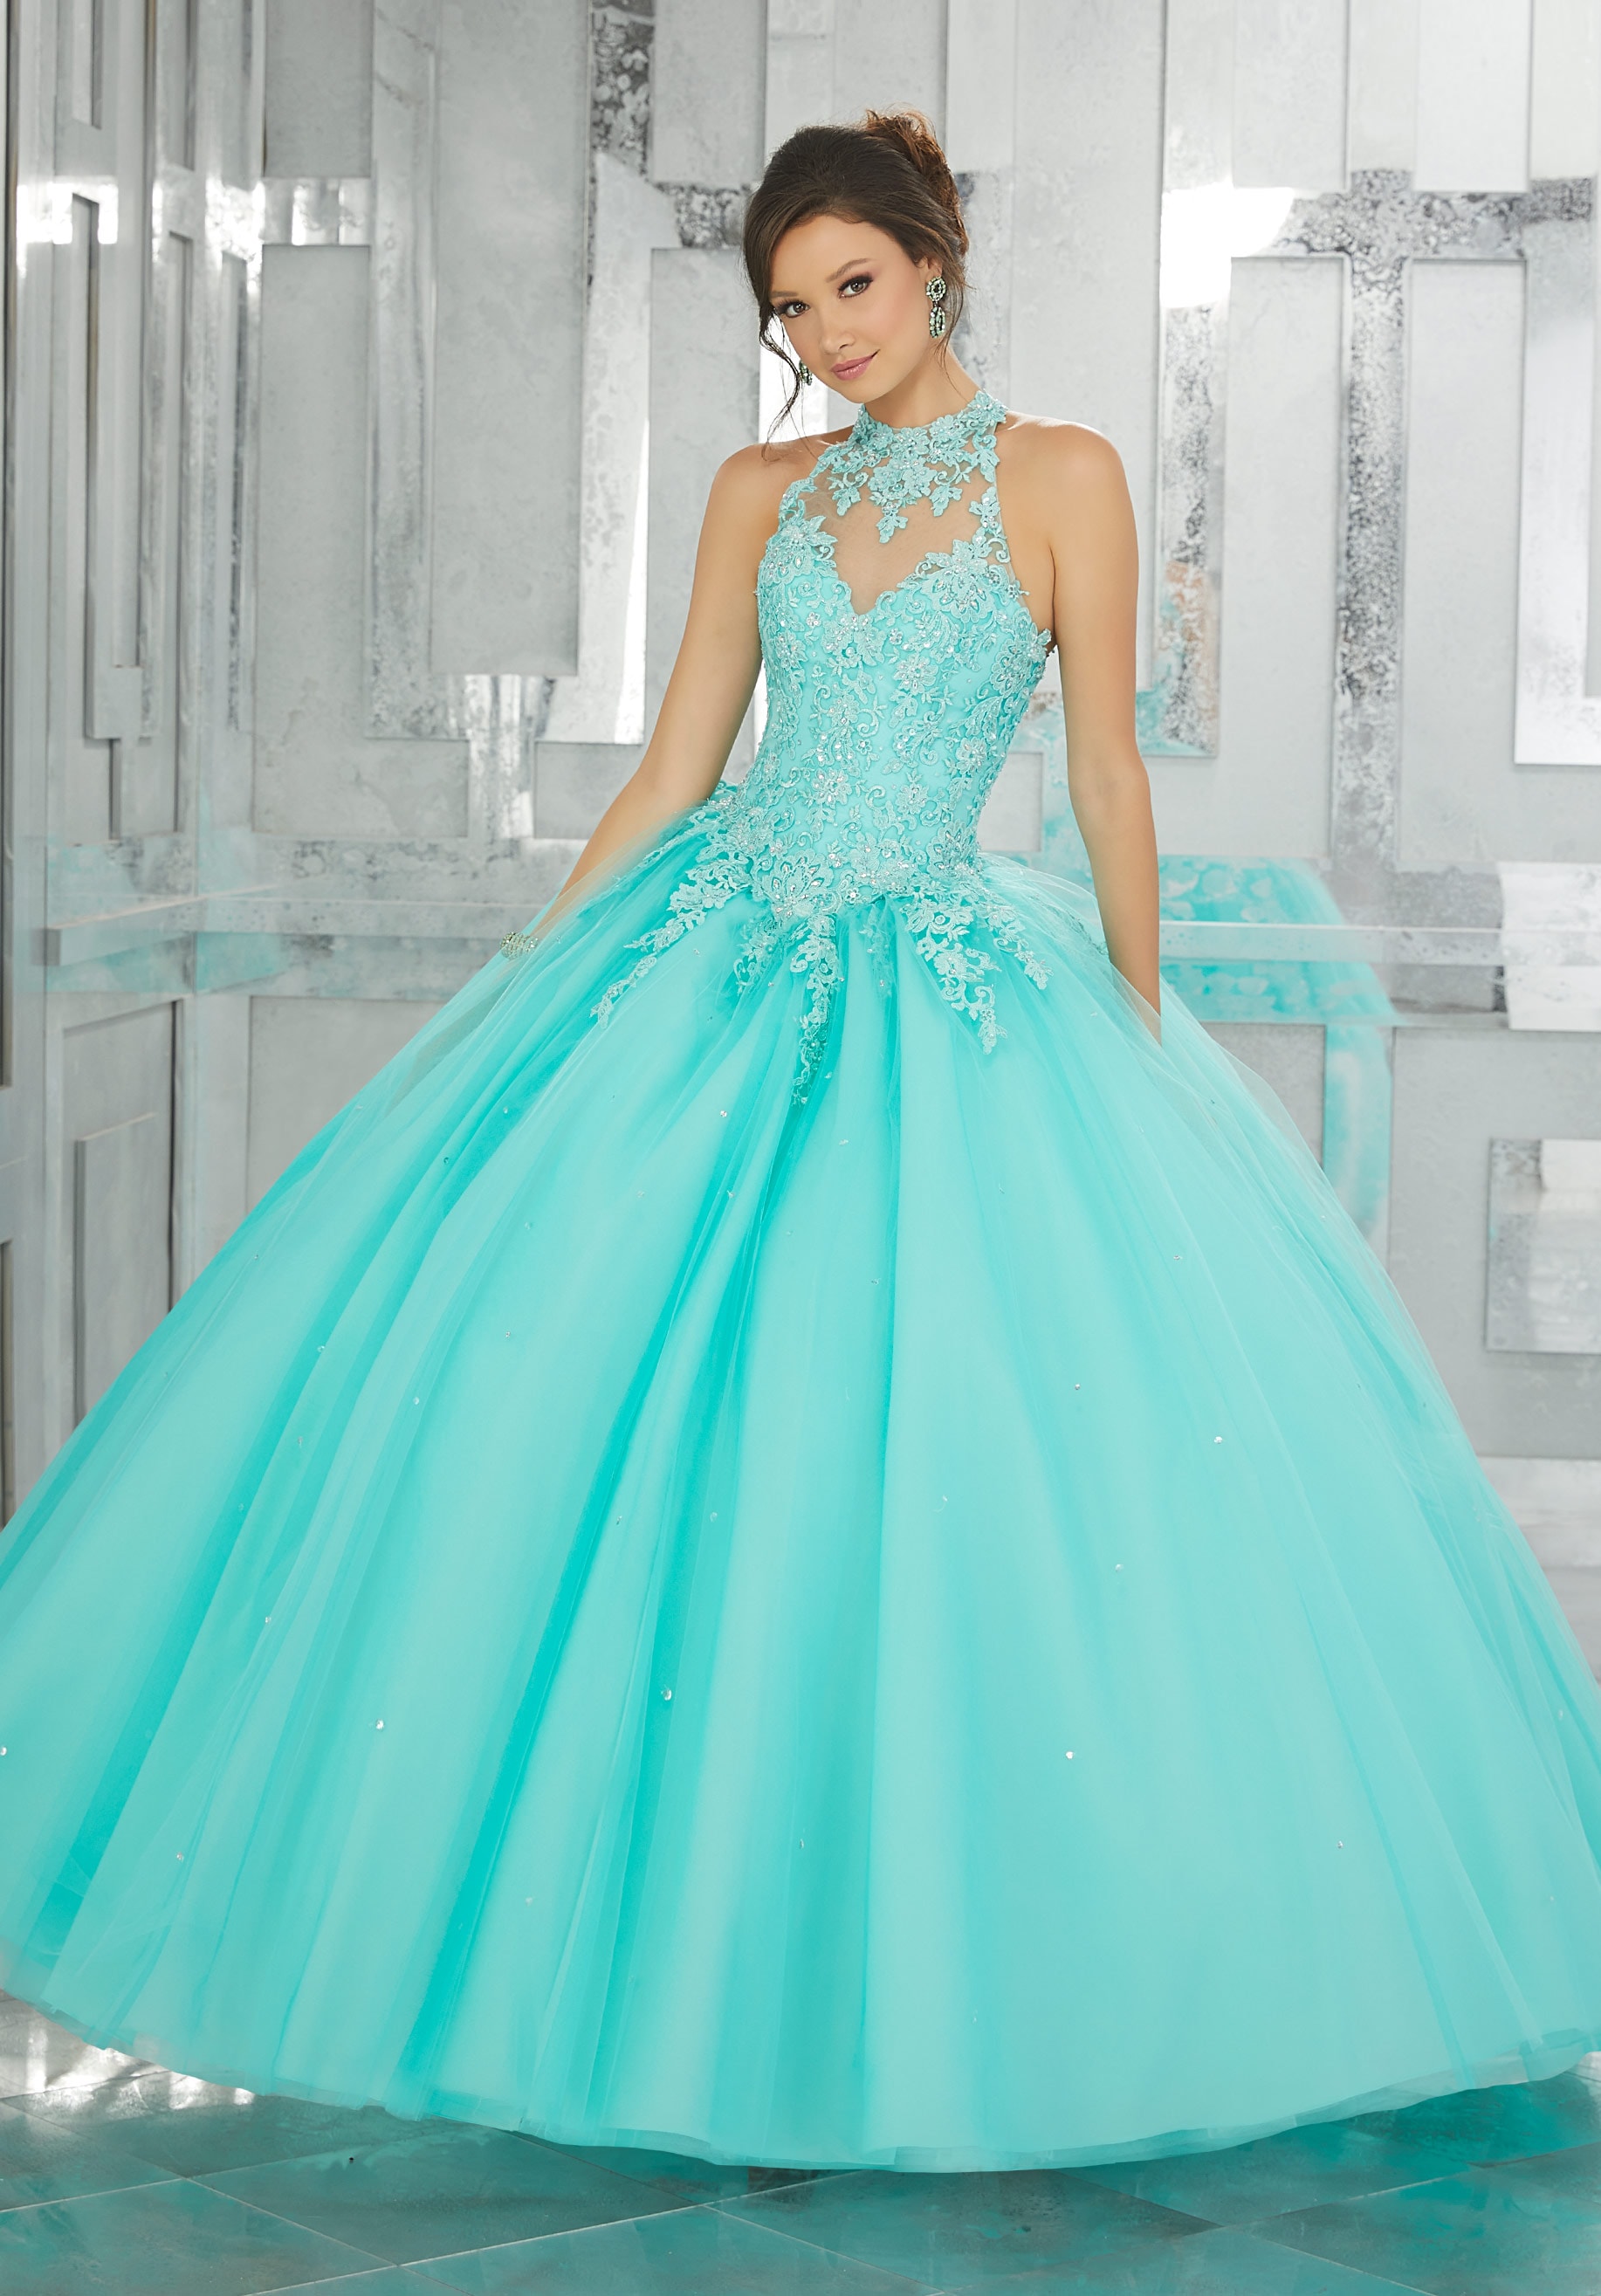 Quinceañera dresses: a woman in a turquoise dress posing for a picture